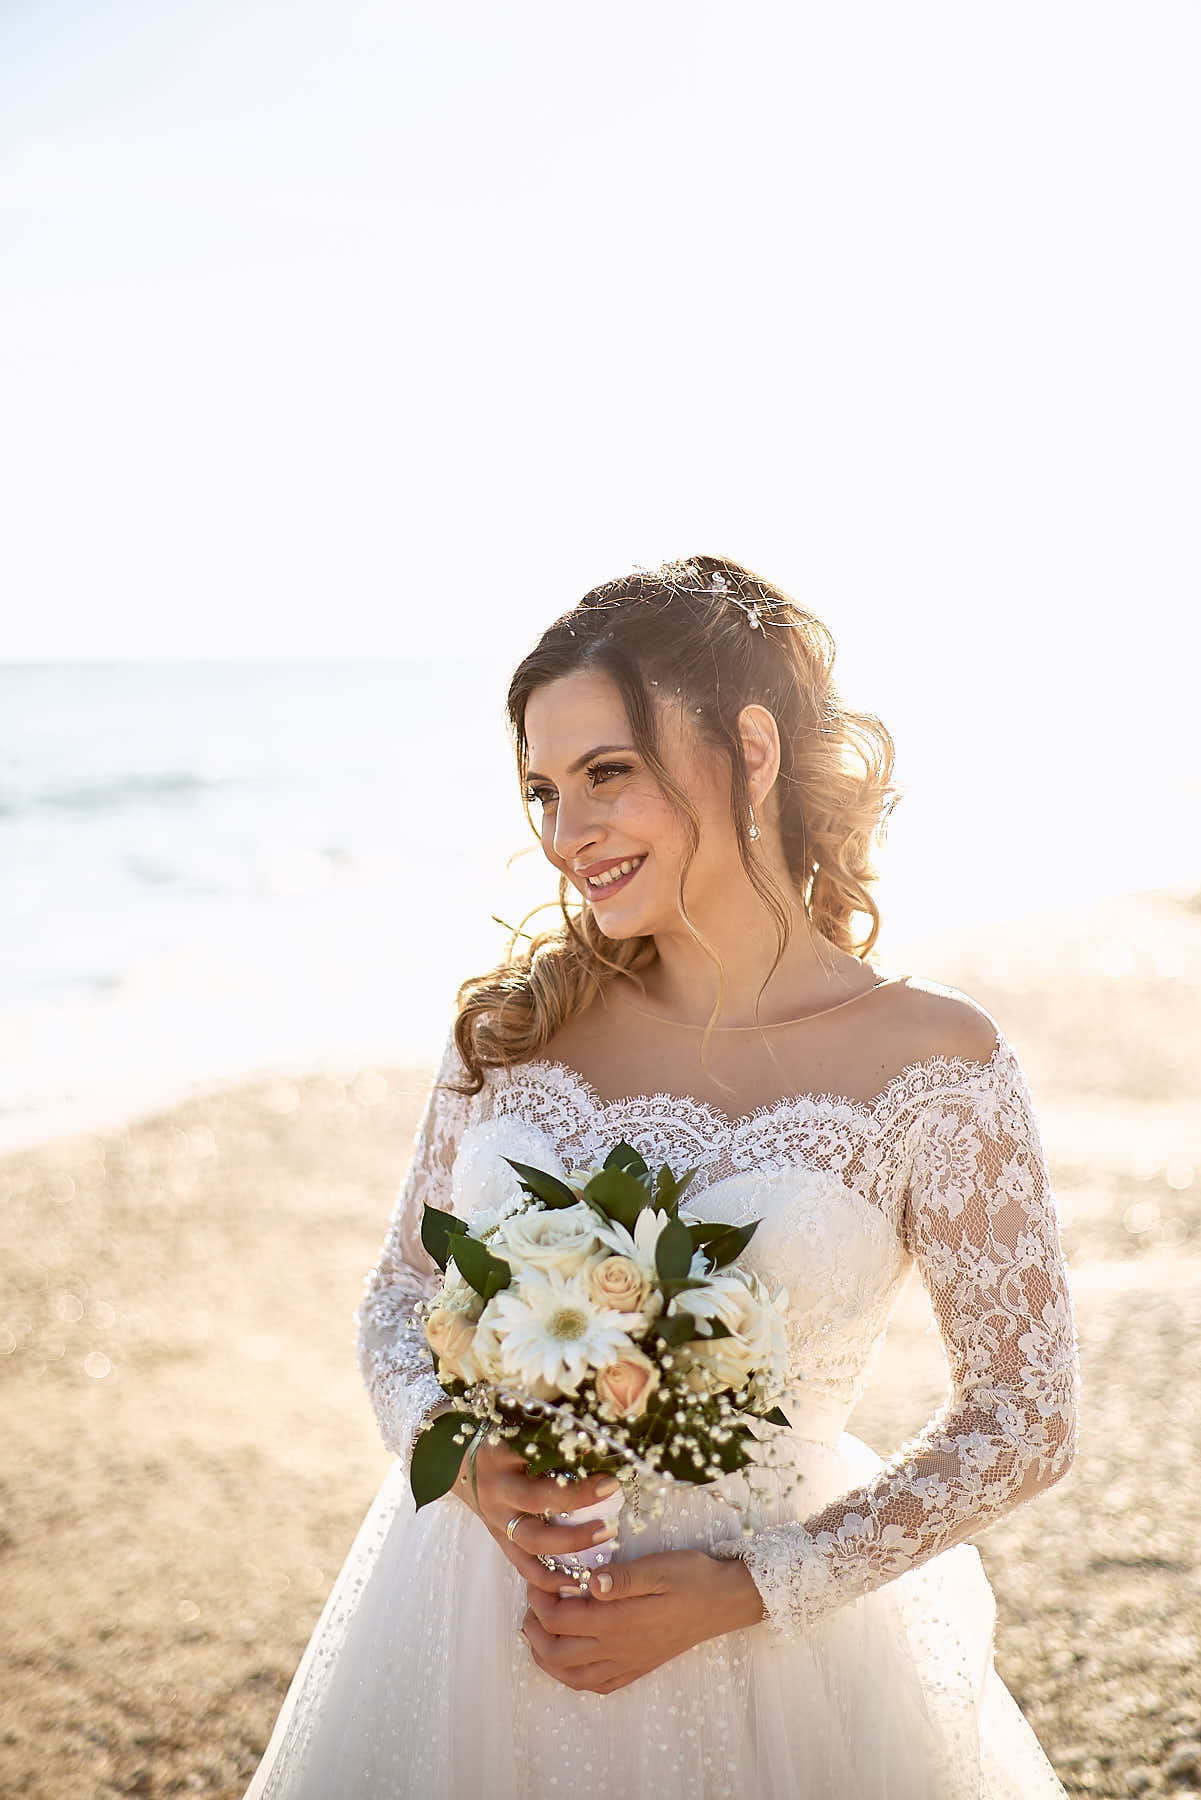 Bride holding flowers, smiling, sunset shining behind her bright